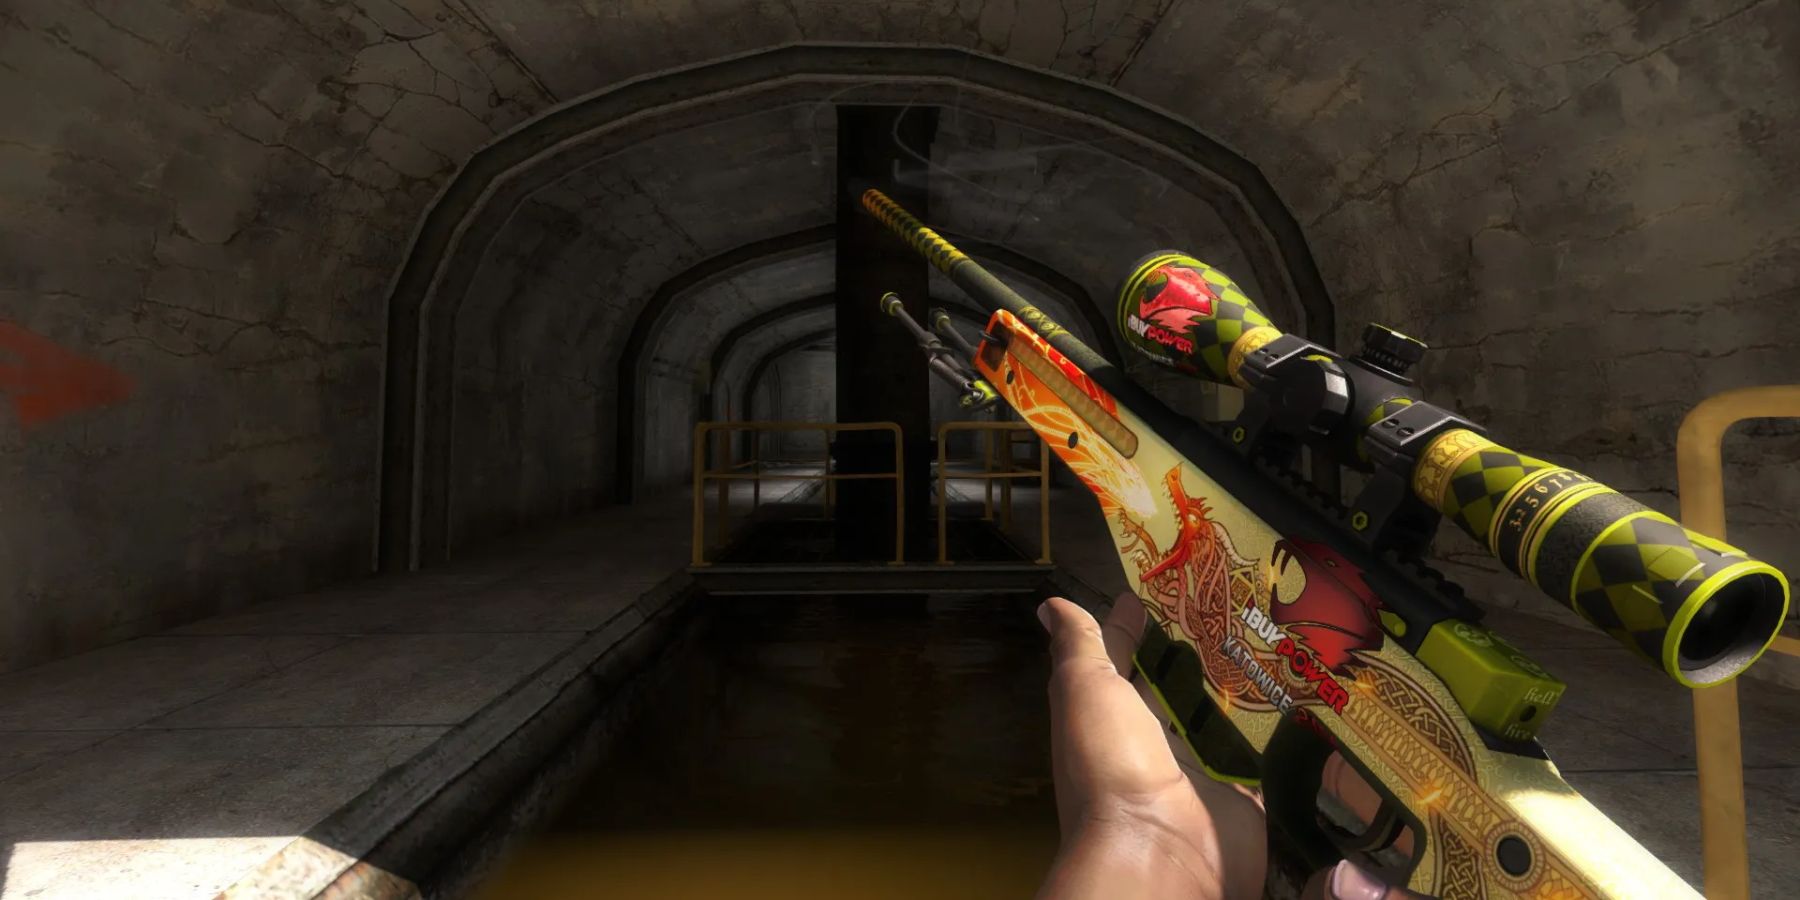 Rifle in Counter-Strike: Global Offensive with a unique skin